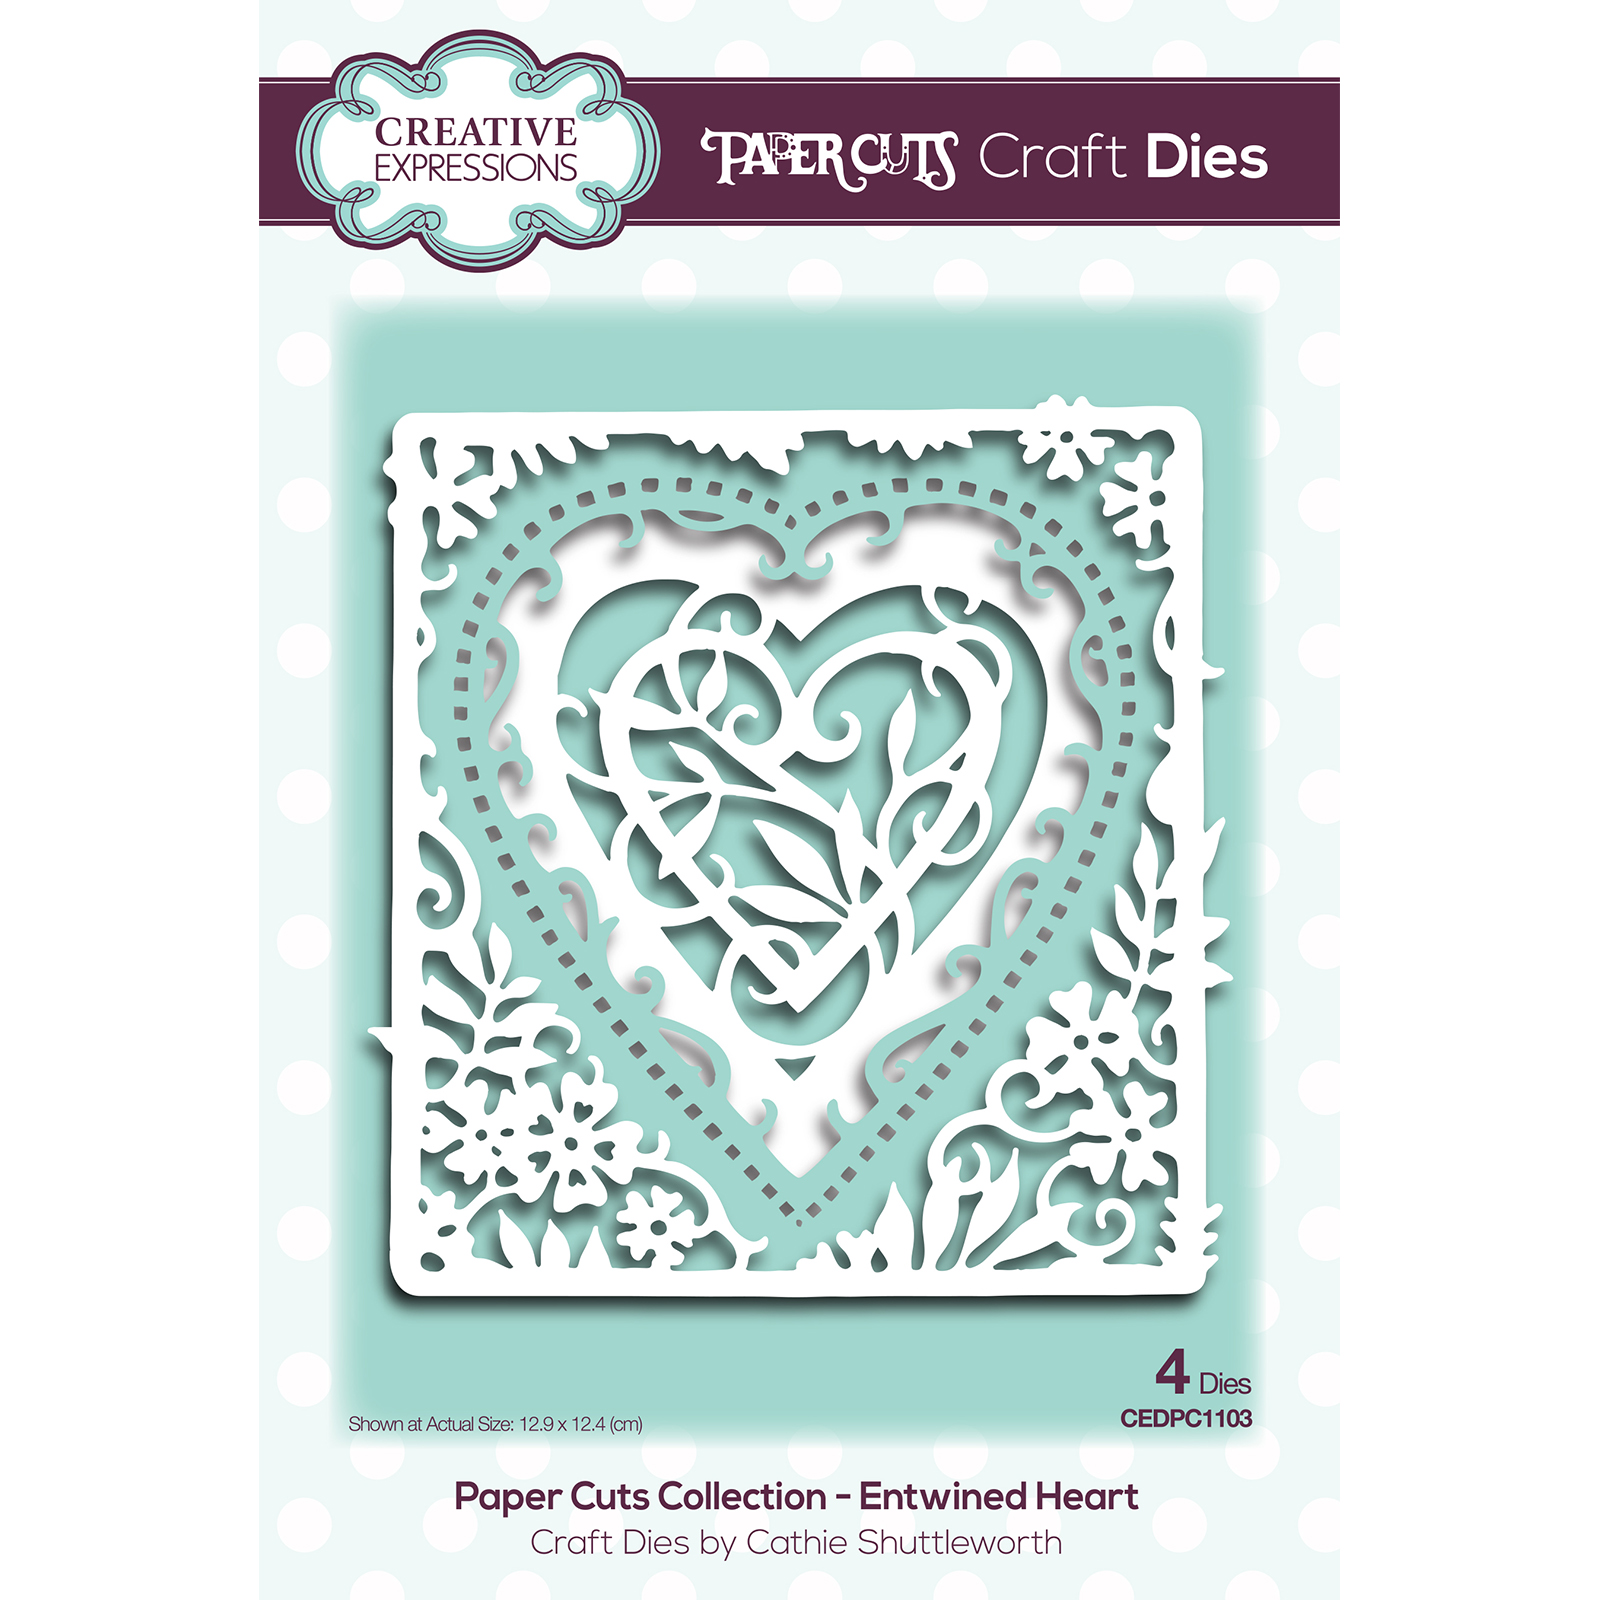 Paper Cuts • Craft dies Entwined heart